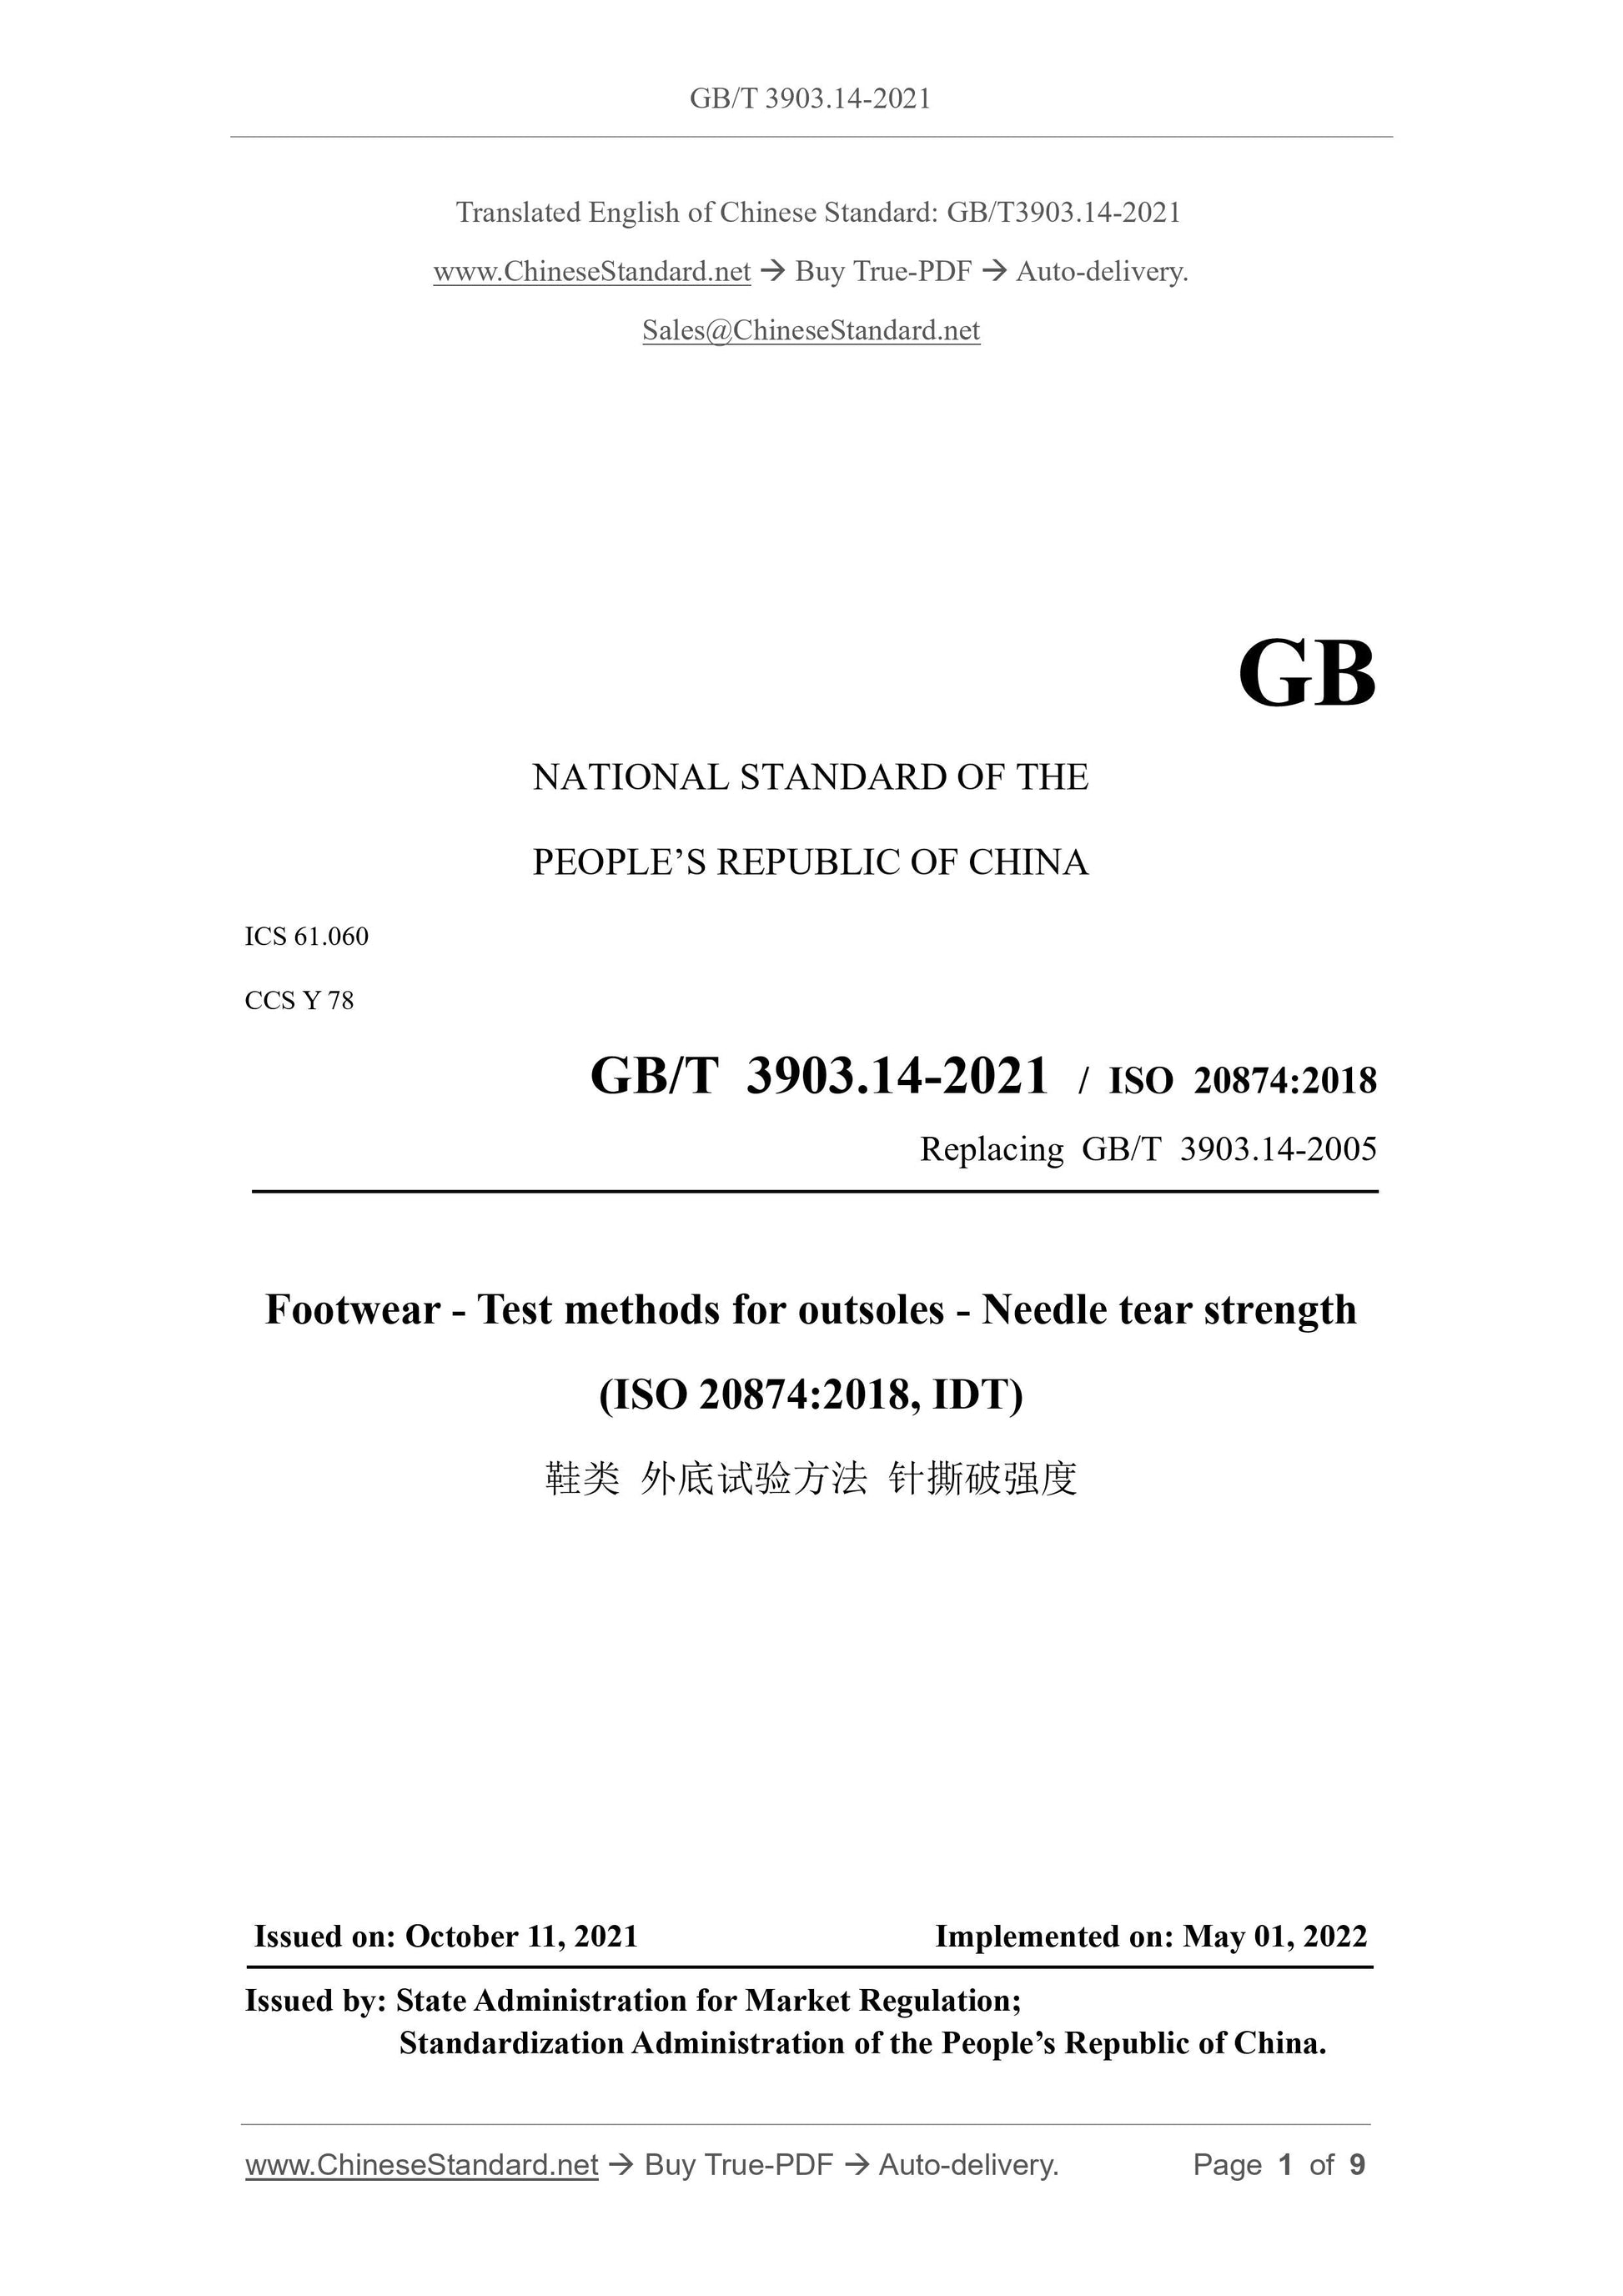 GB/T 3903.14-2021 Page 1